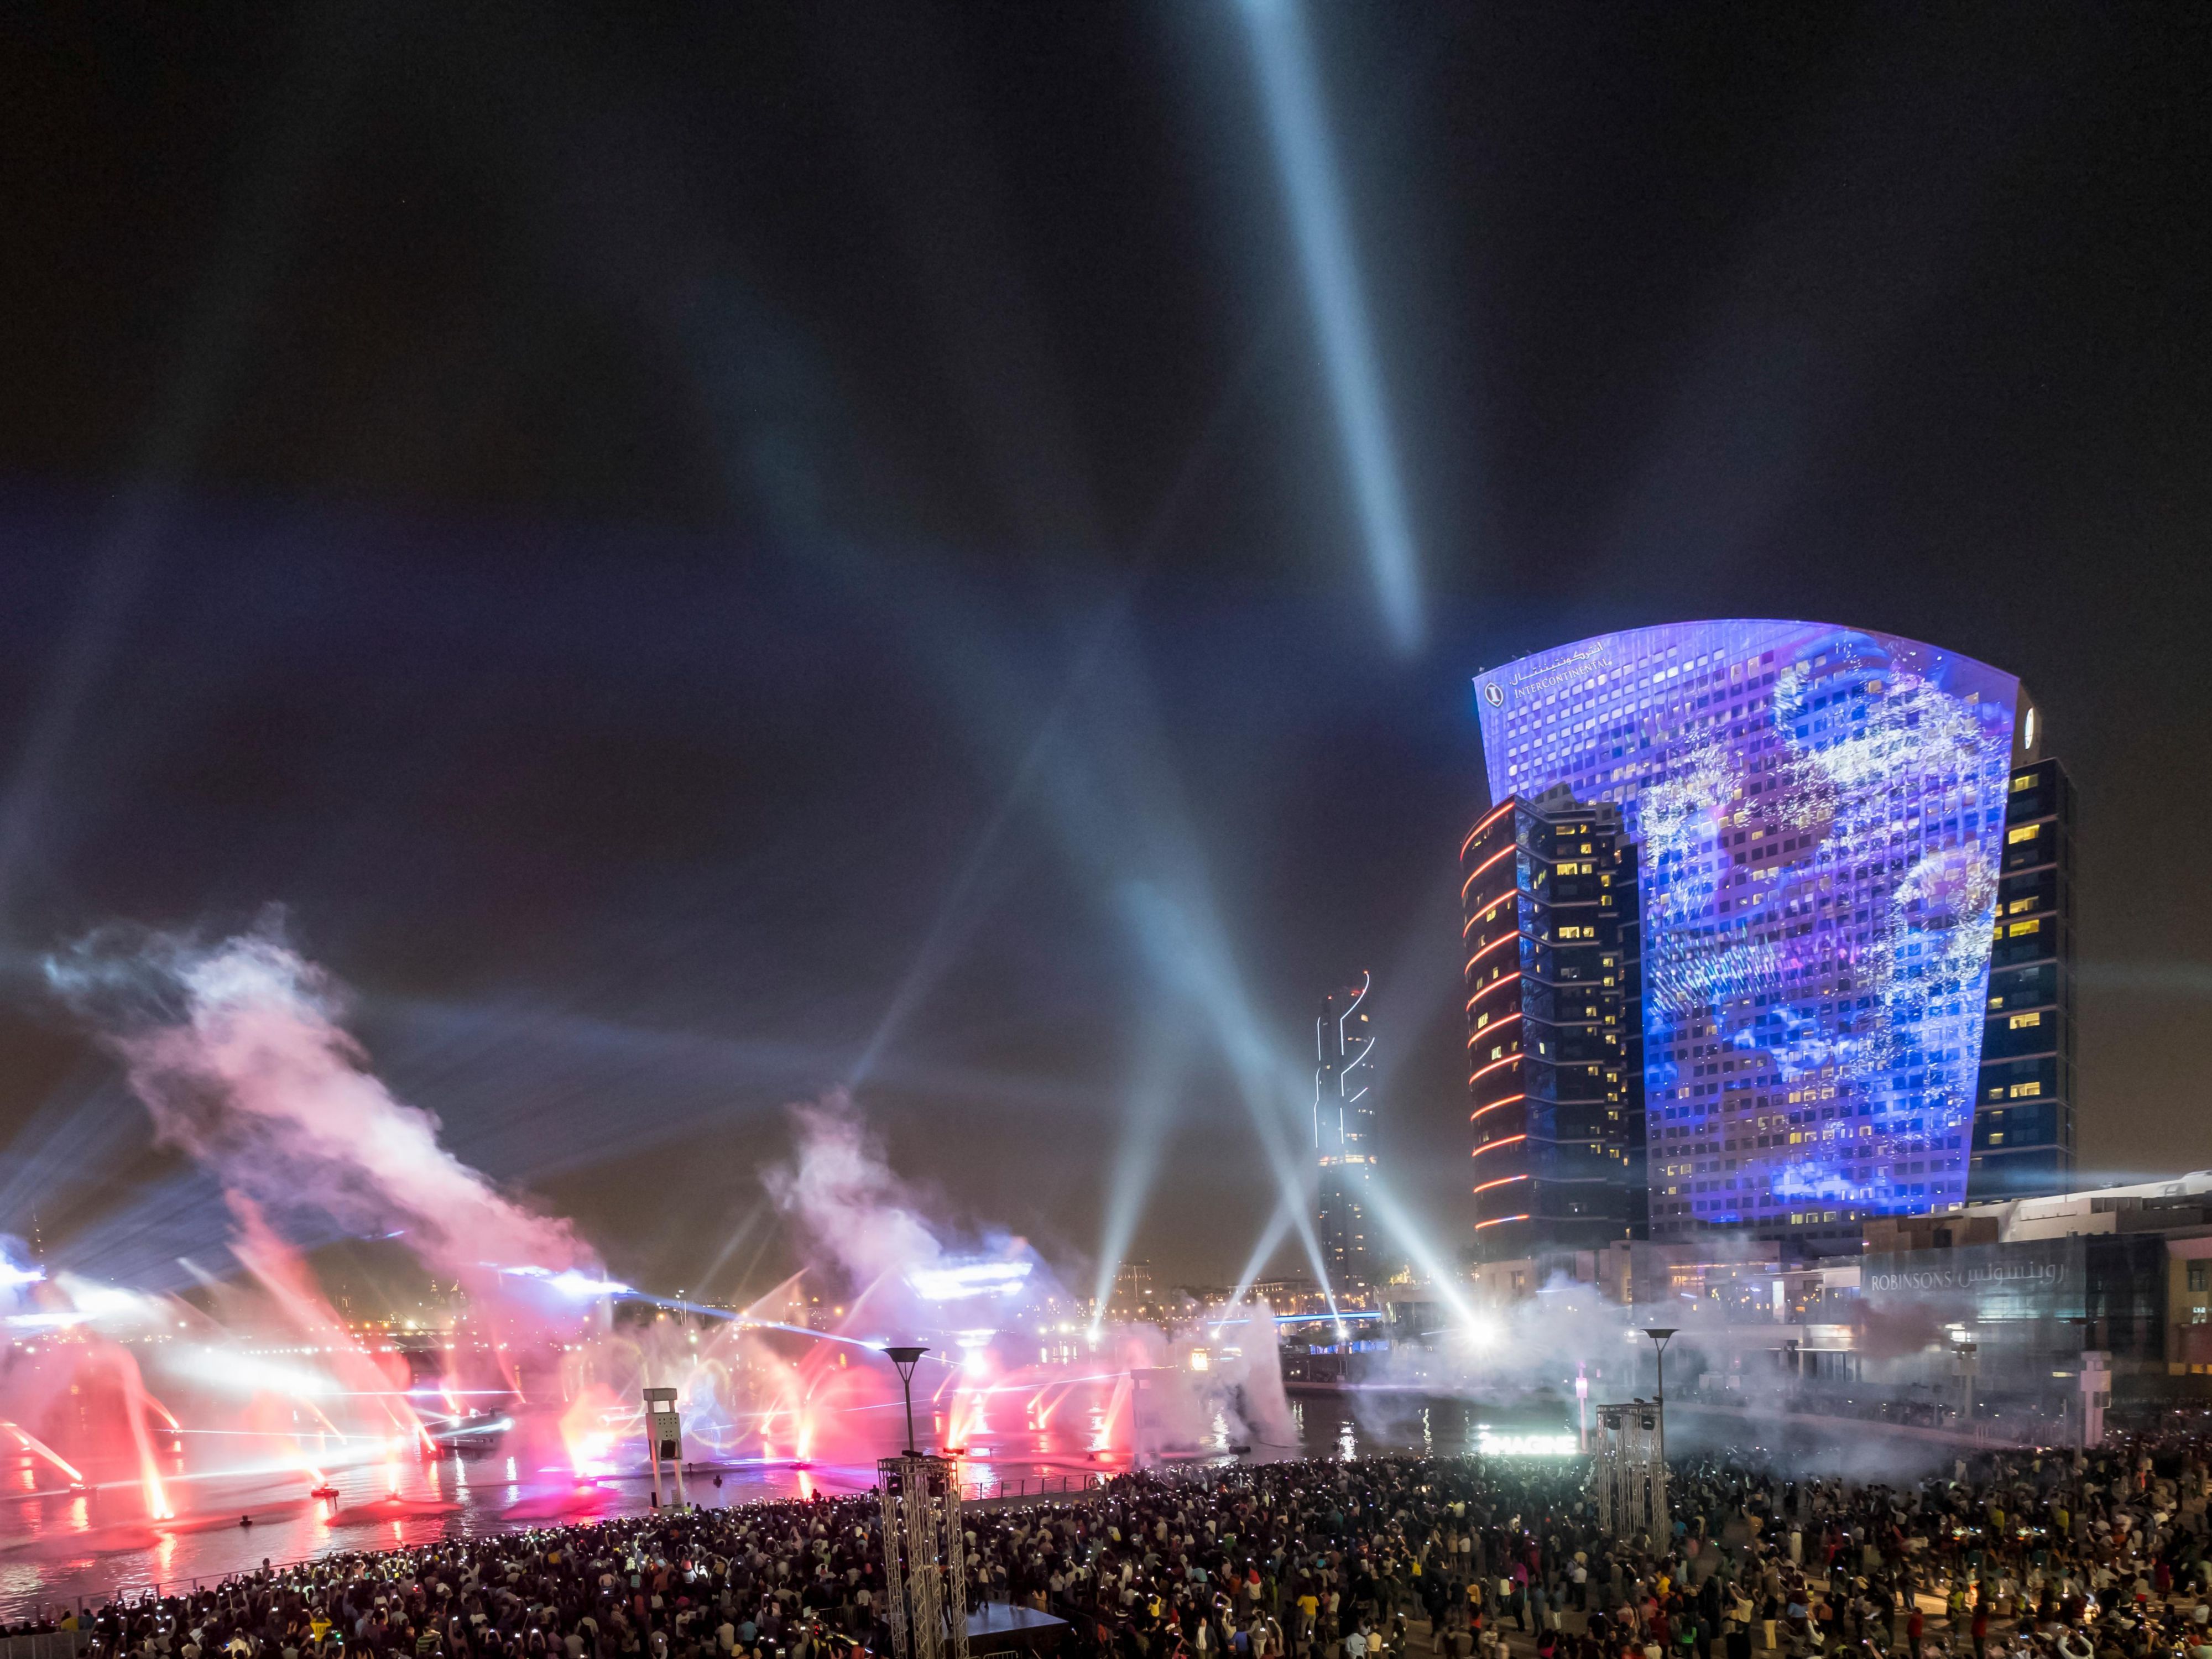 Holiday Inn Dubai Festival City is directly connected to Dubai Festival City Mall, home to 500 retail shops and restaurants including the world-record breaking Imagine show, a display of fire, water, and light projected at the building of InterContinental Dubai Festival City.